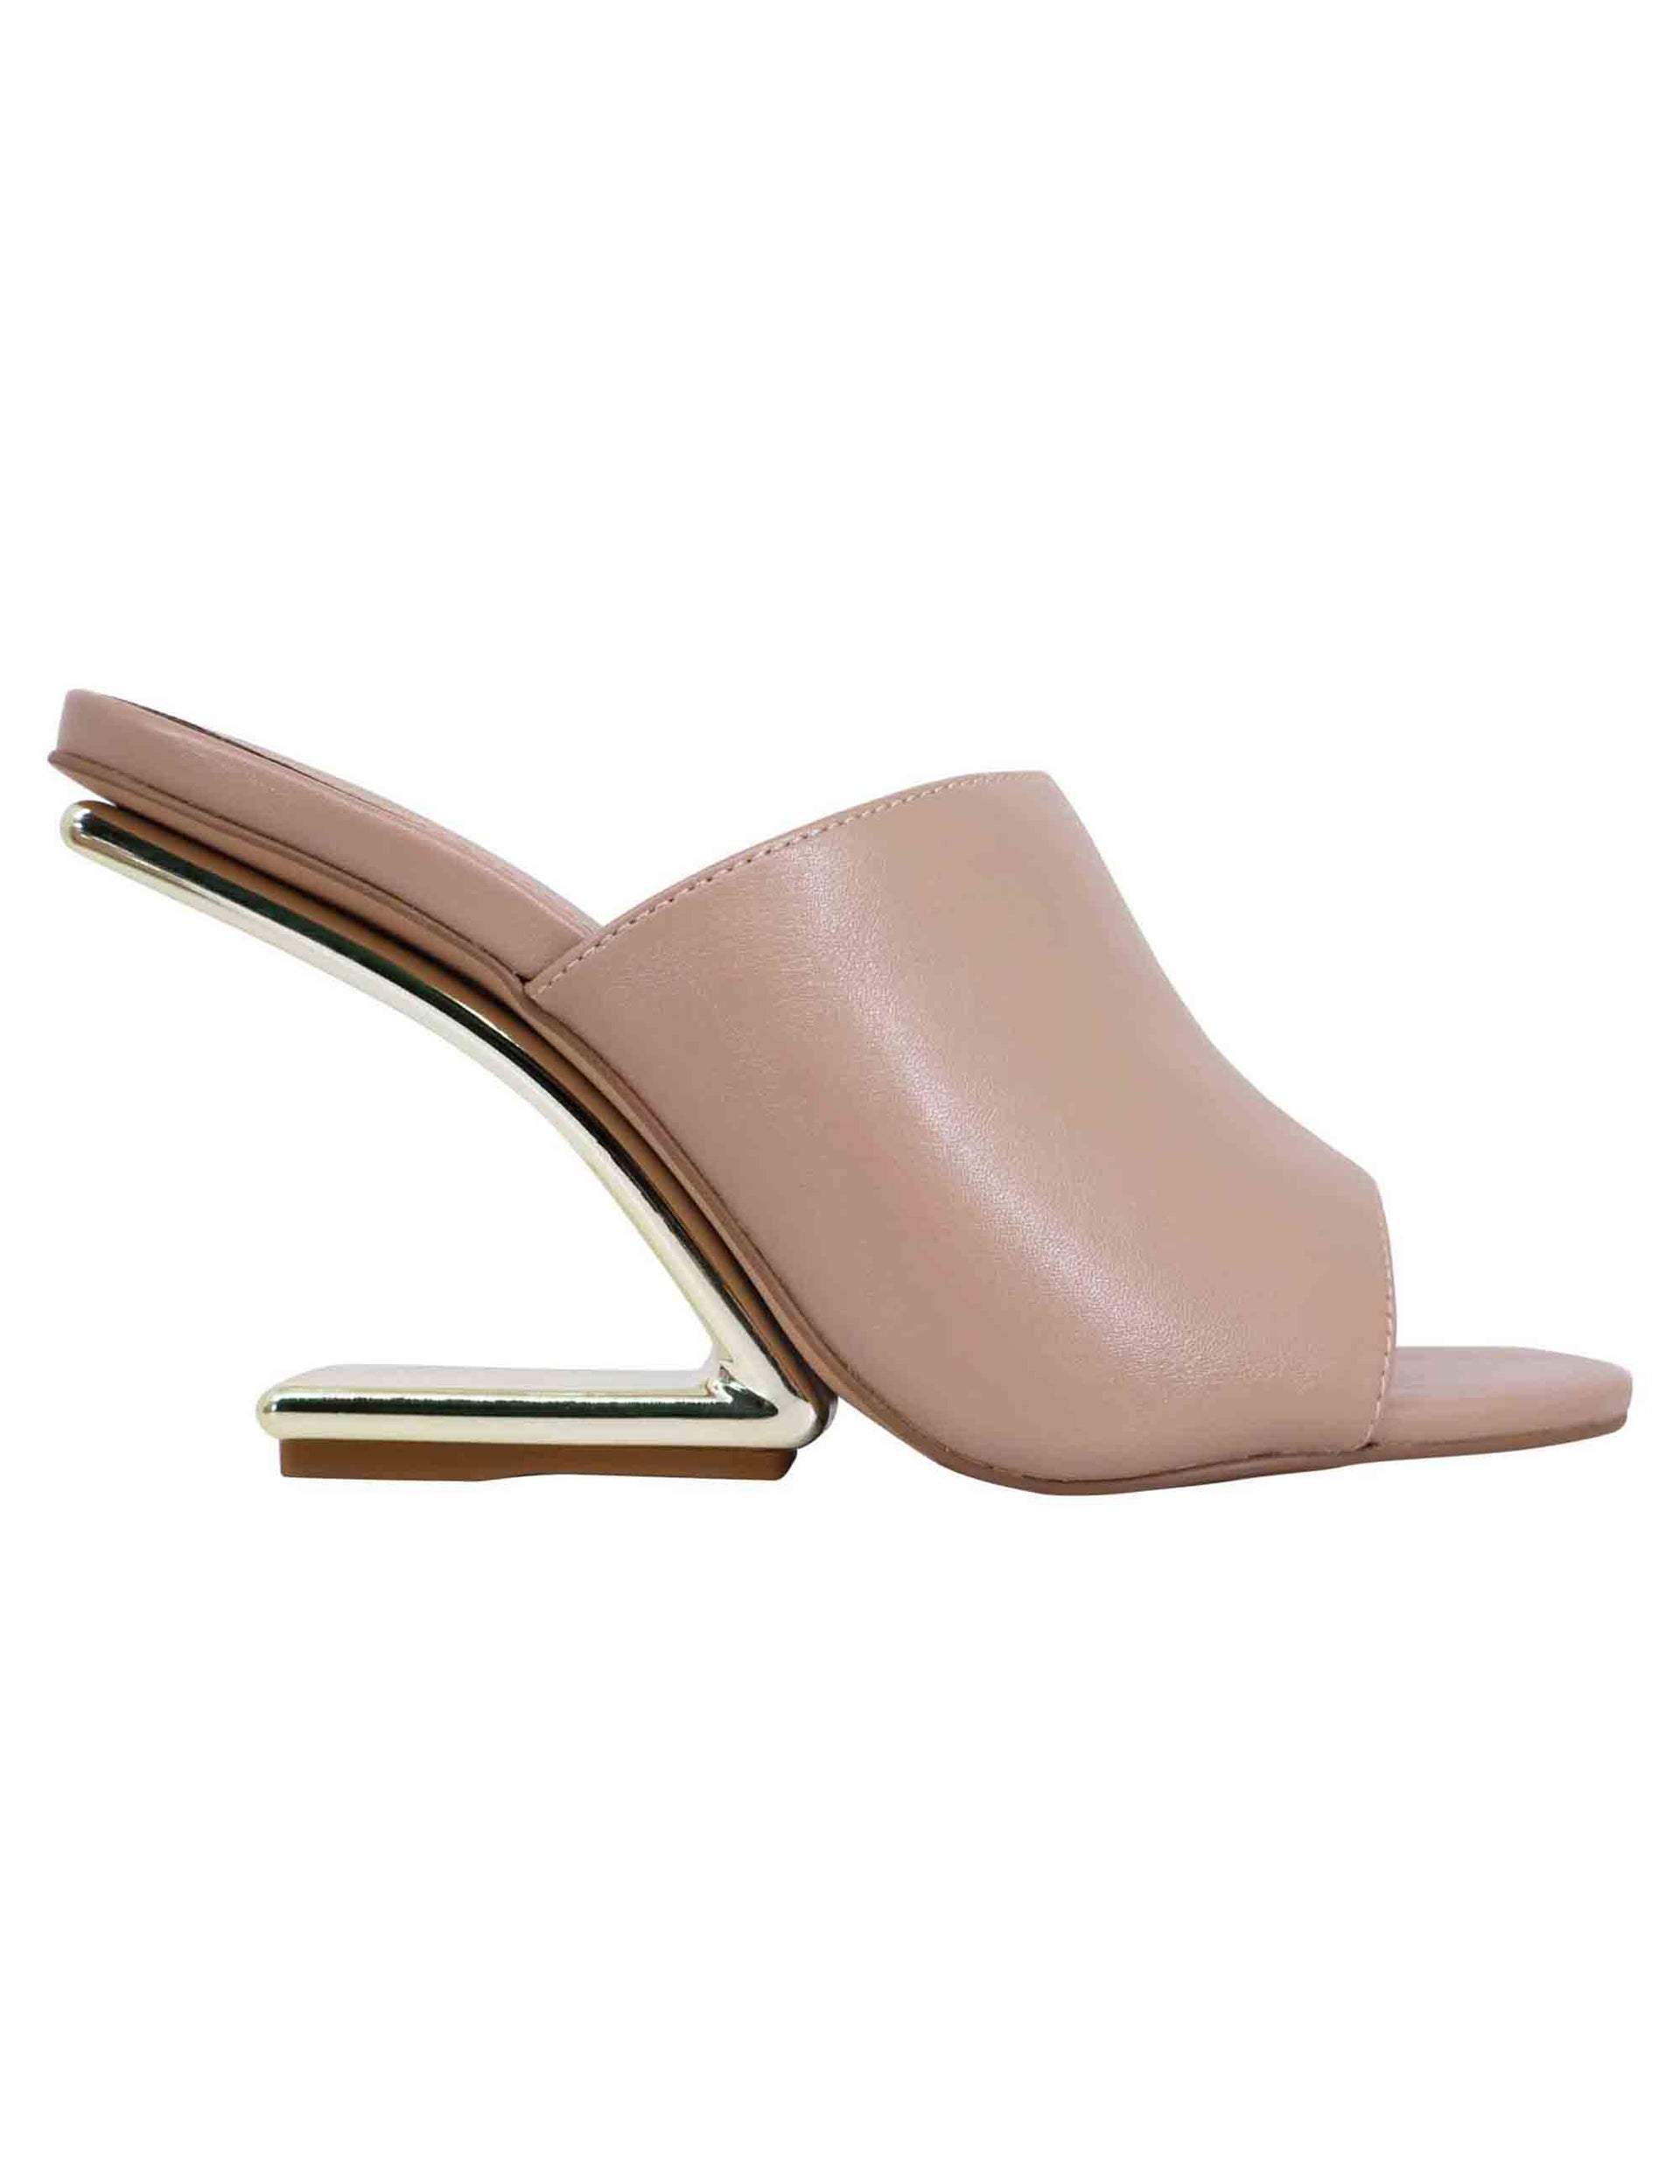 Women's nude leather sandals with high wedge heel